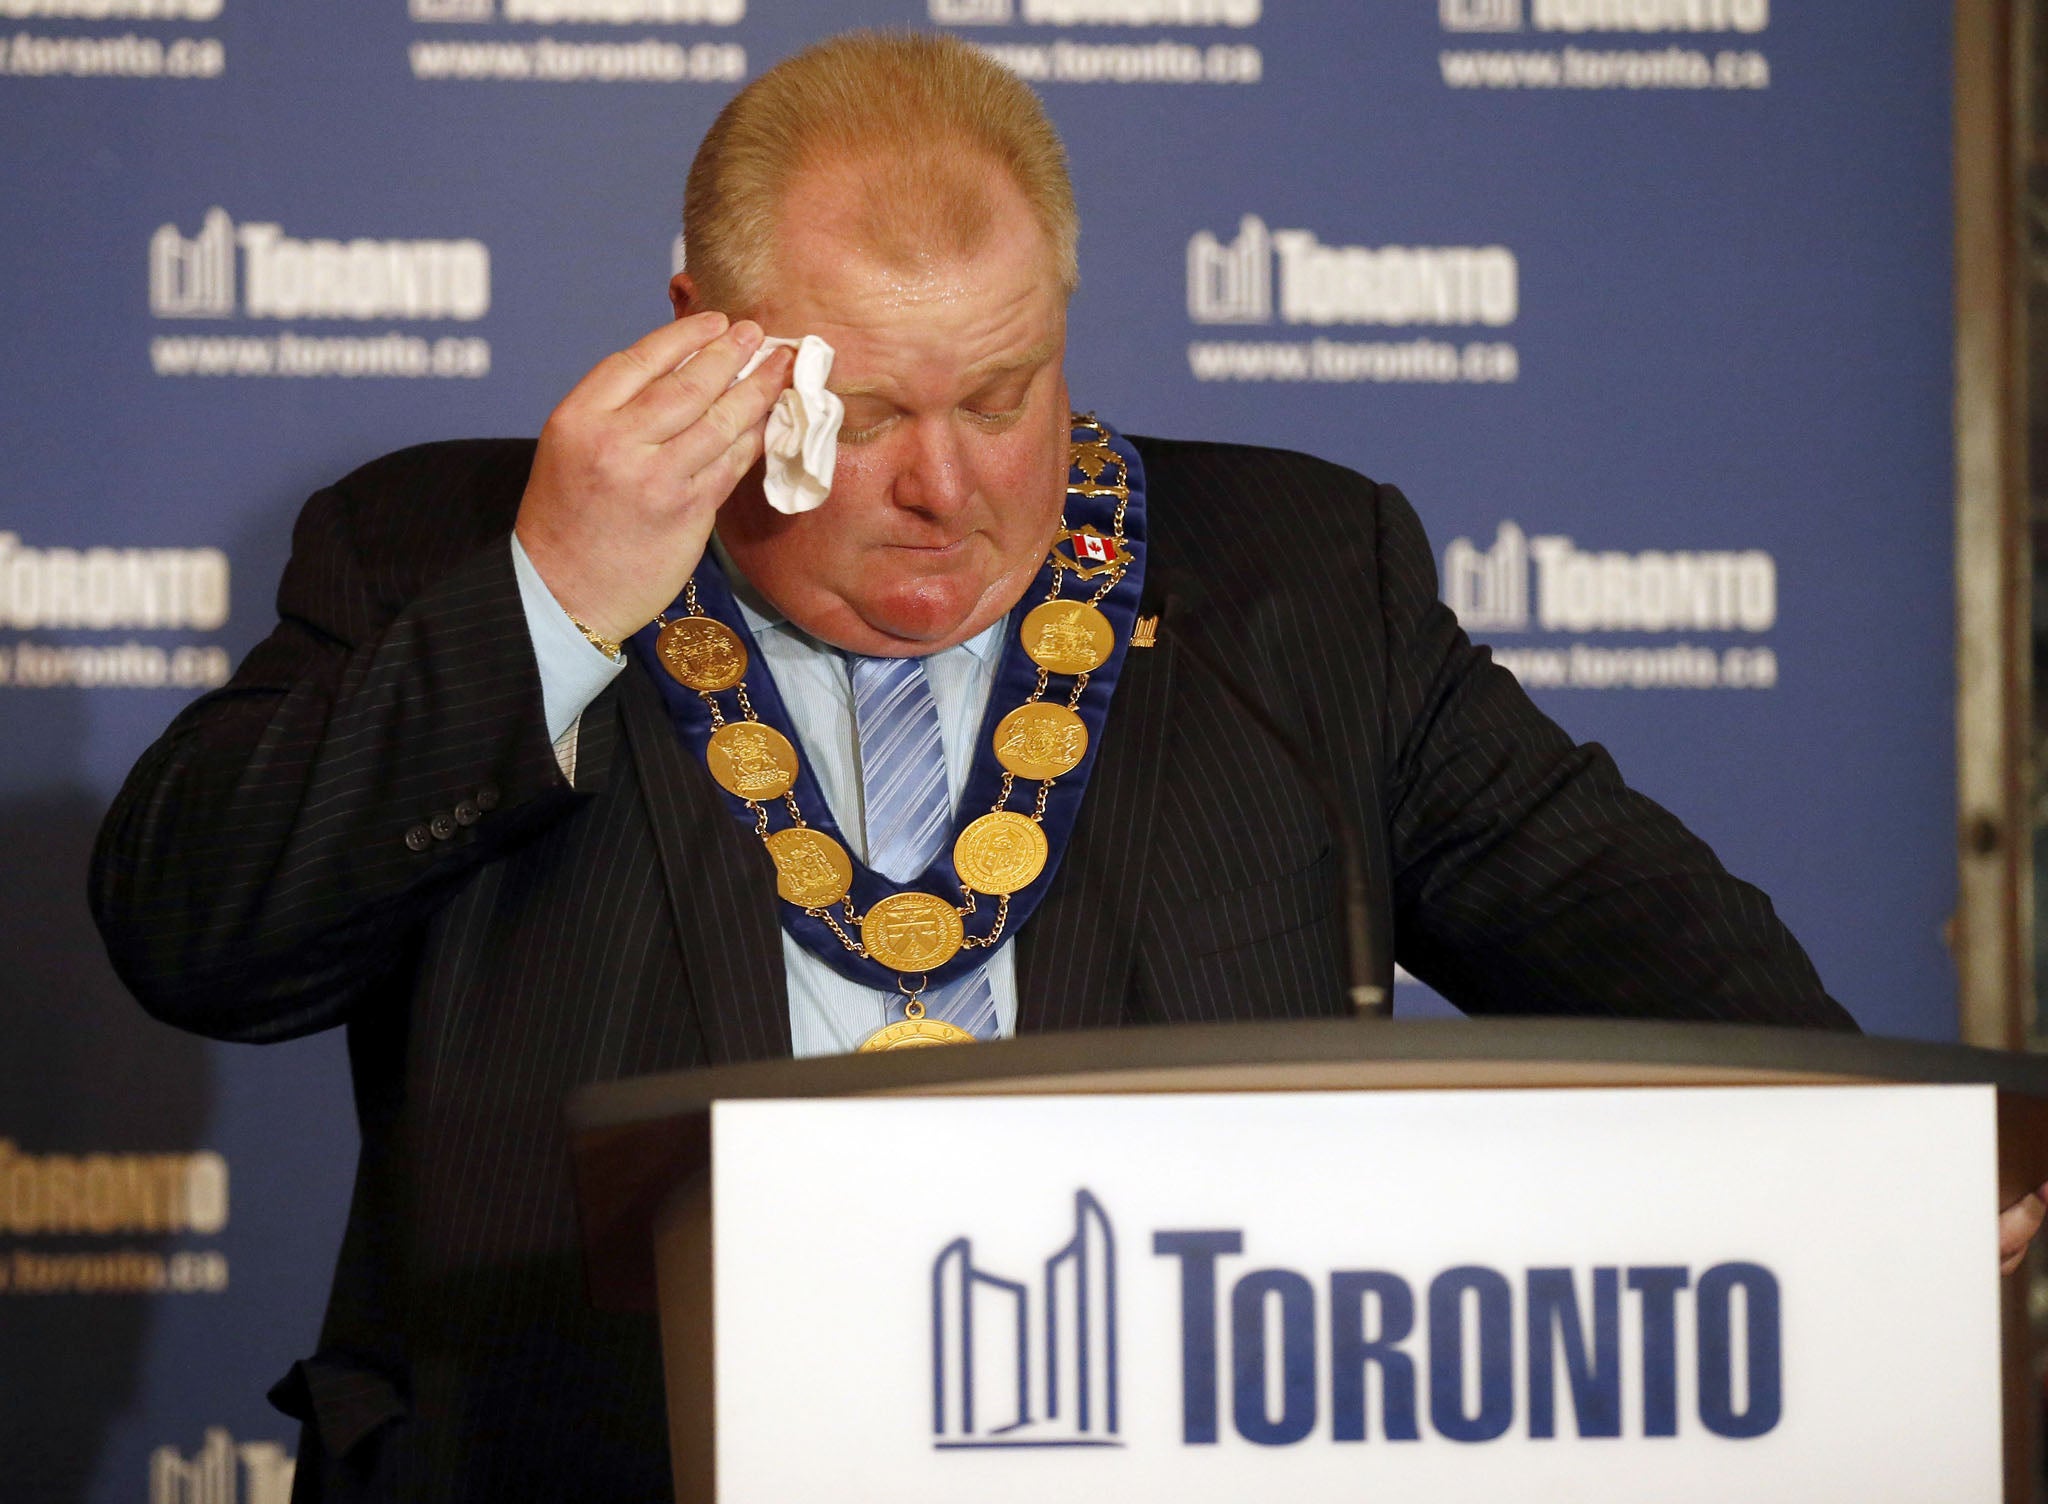 The heat is on: Mayor of Toronto Rob Ford is alleged to have offered suspected gang members thousands for a video which shows him smoking crack cocaine.